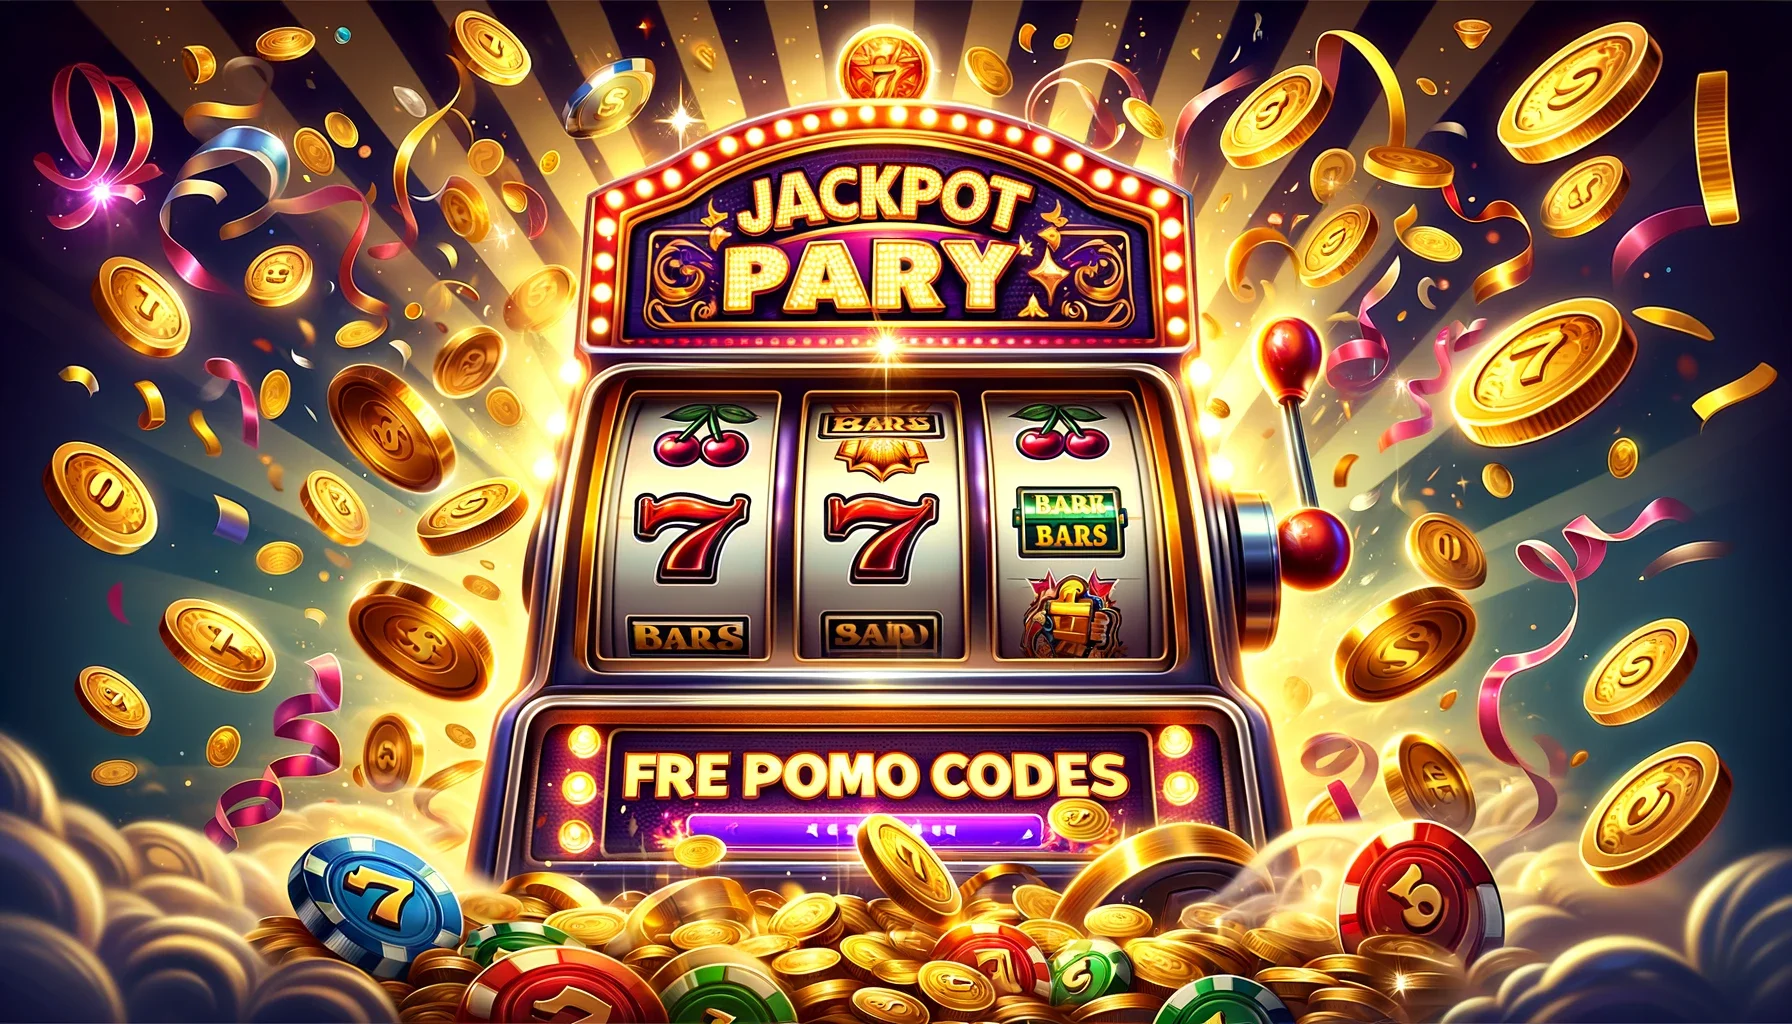 Jackpot Party Free Promo Codes